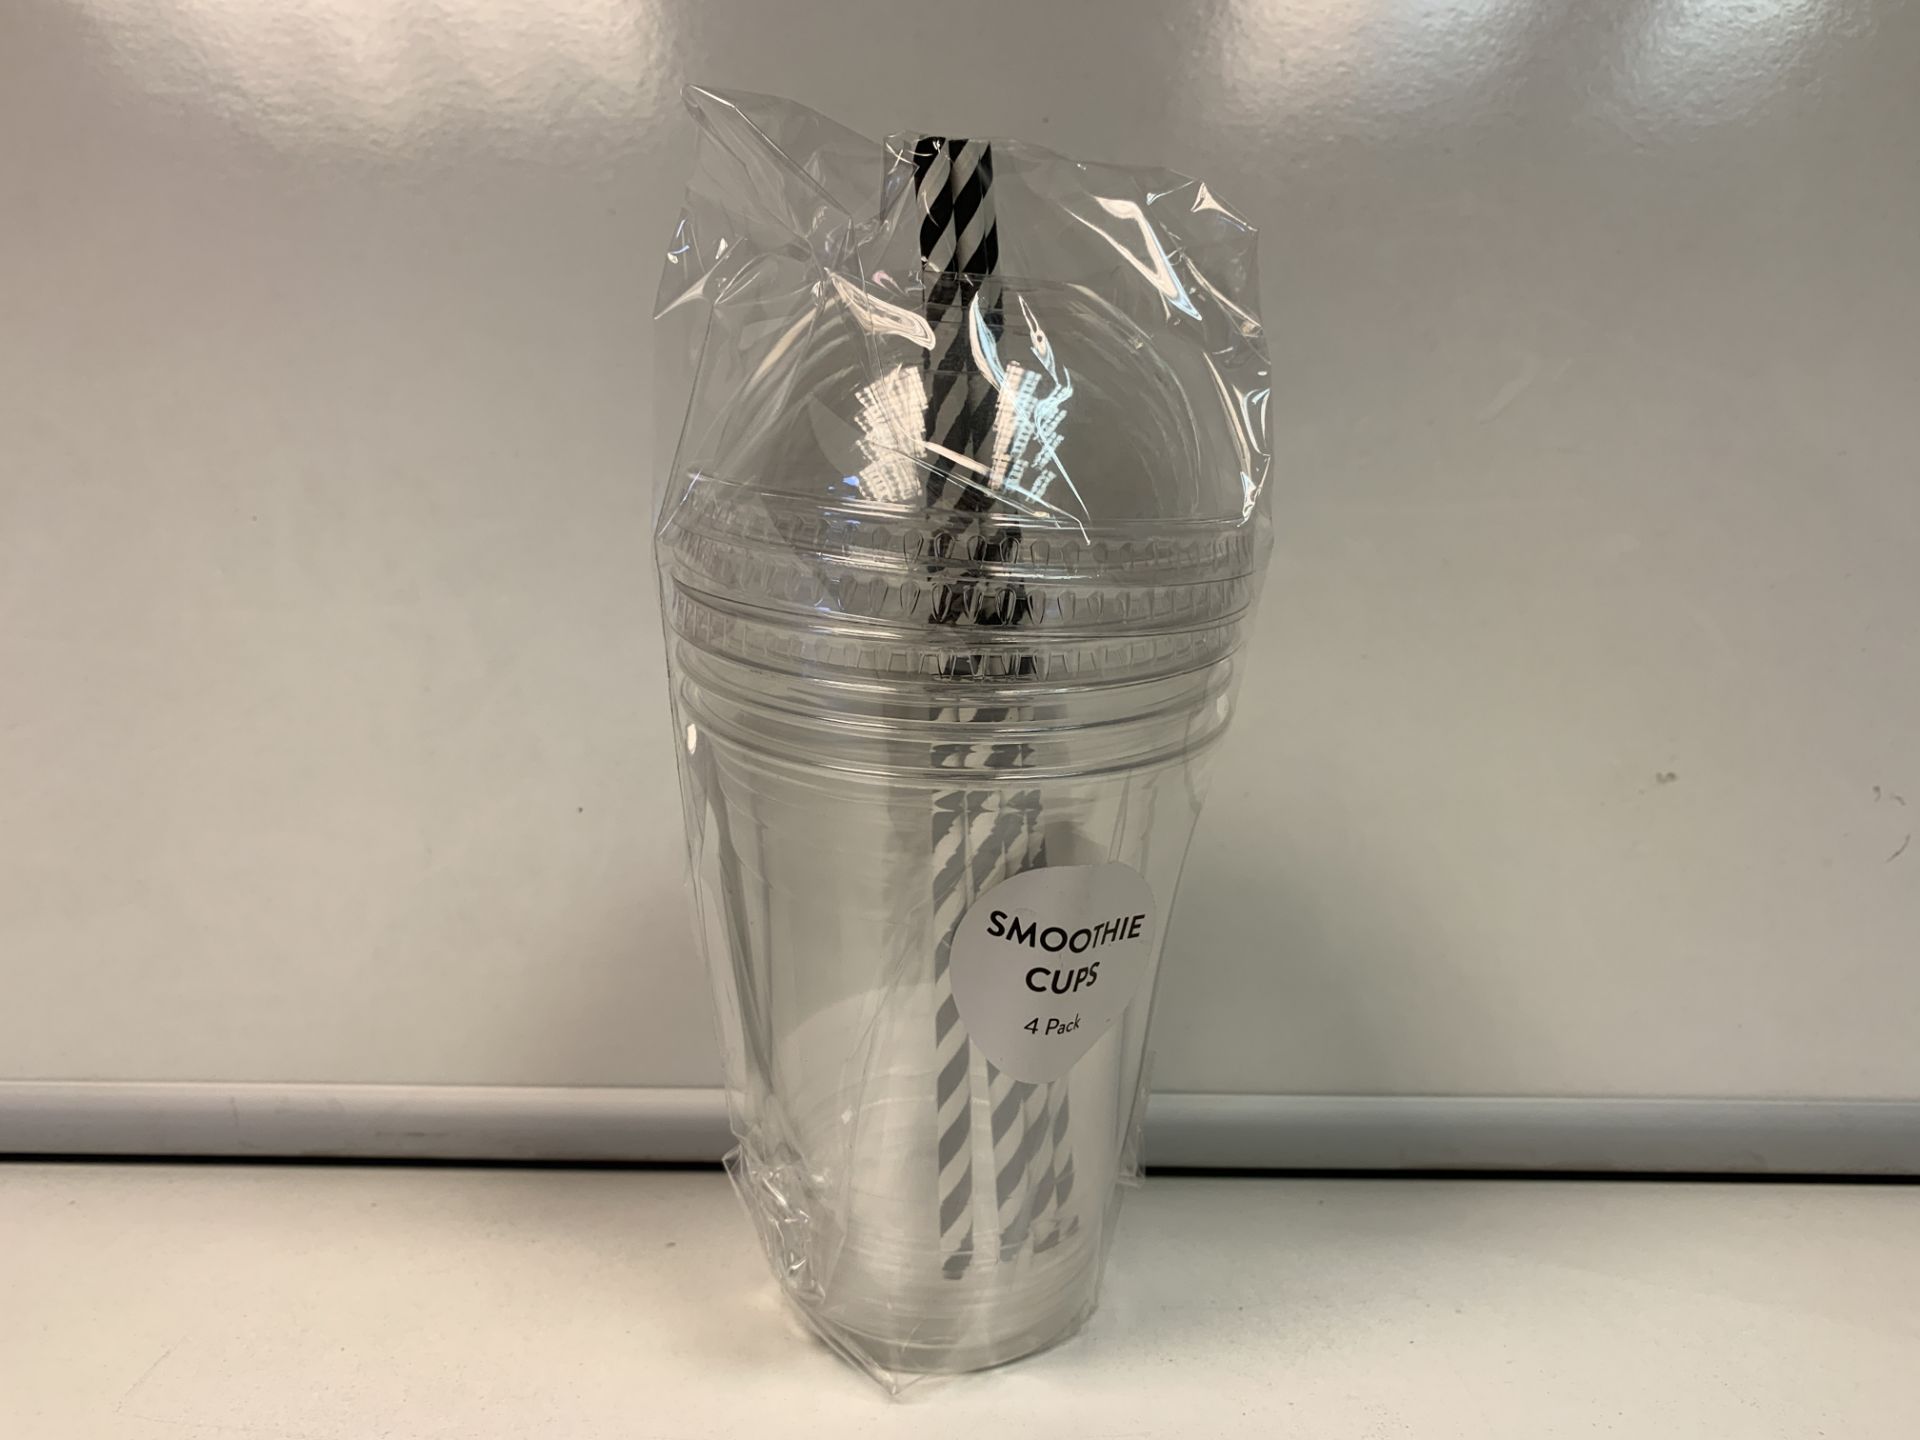 100 X NEW SEALED PACKS OF SMOOTIE CUPS, LIDS & PAPER STRAWS. EACH PACK CONTAINS 4 CUPS, 4 LIDS & 4